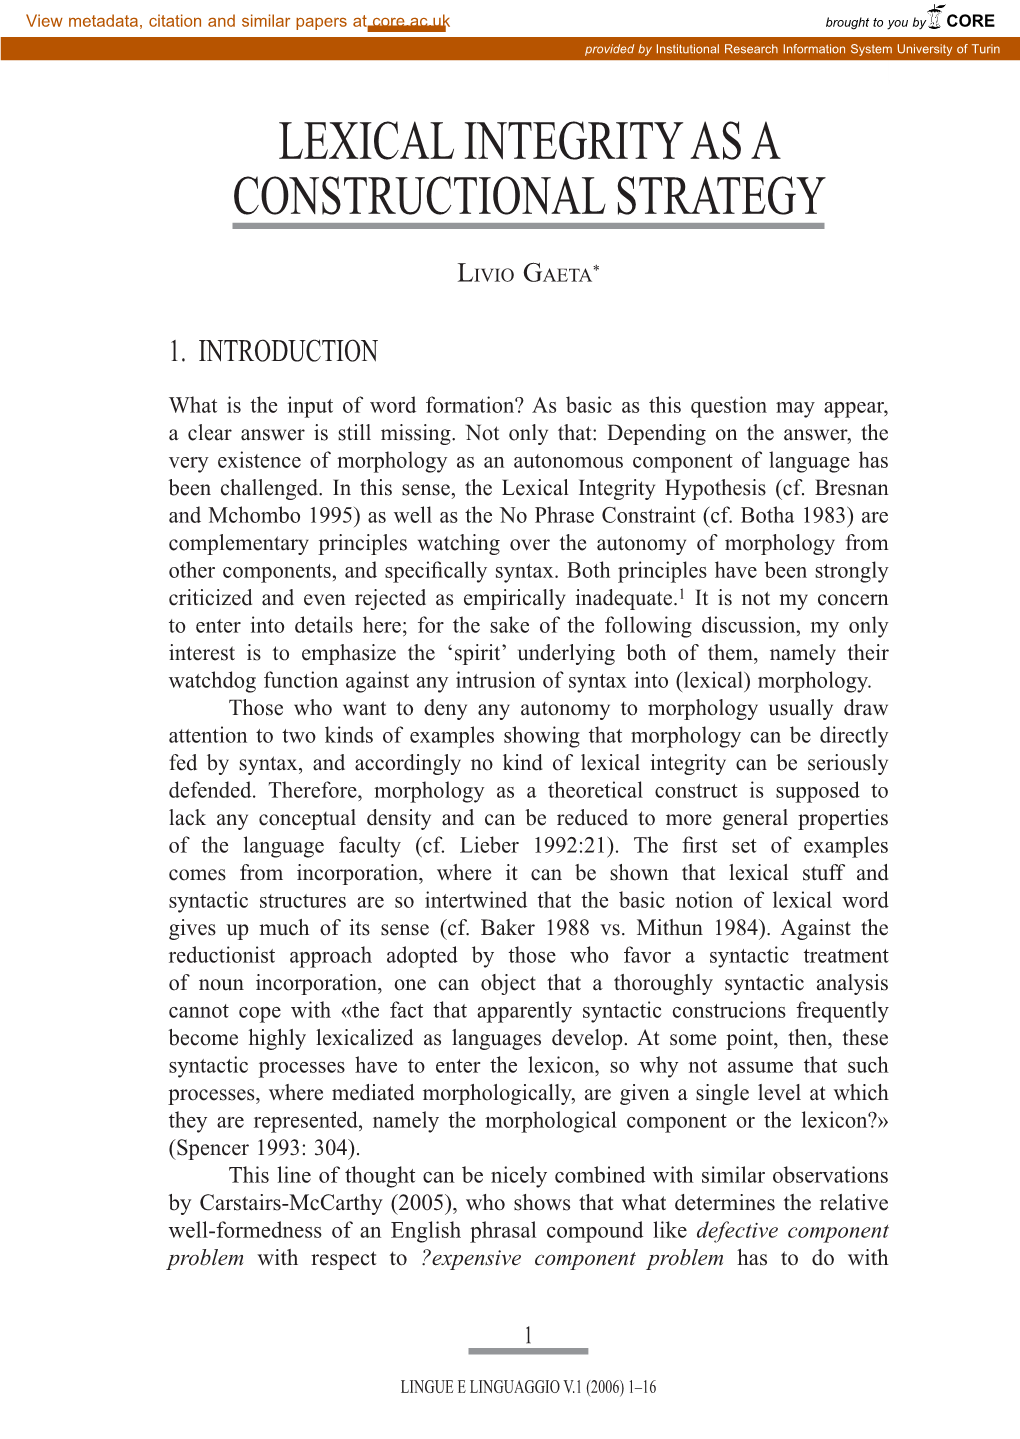 Lexical Integrity As a Constructional Strategy